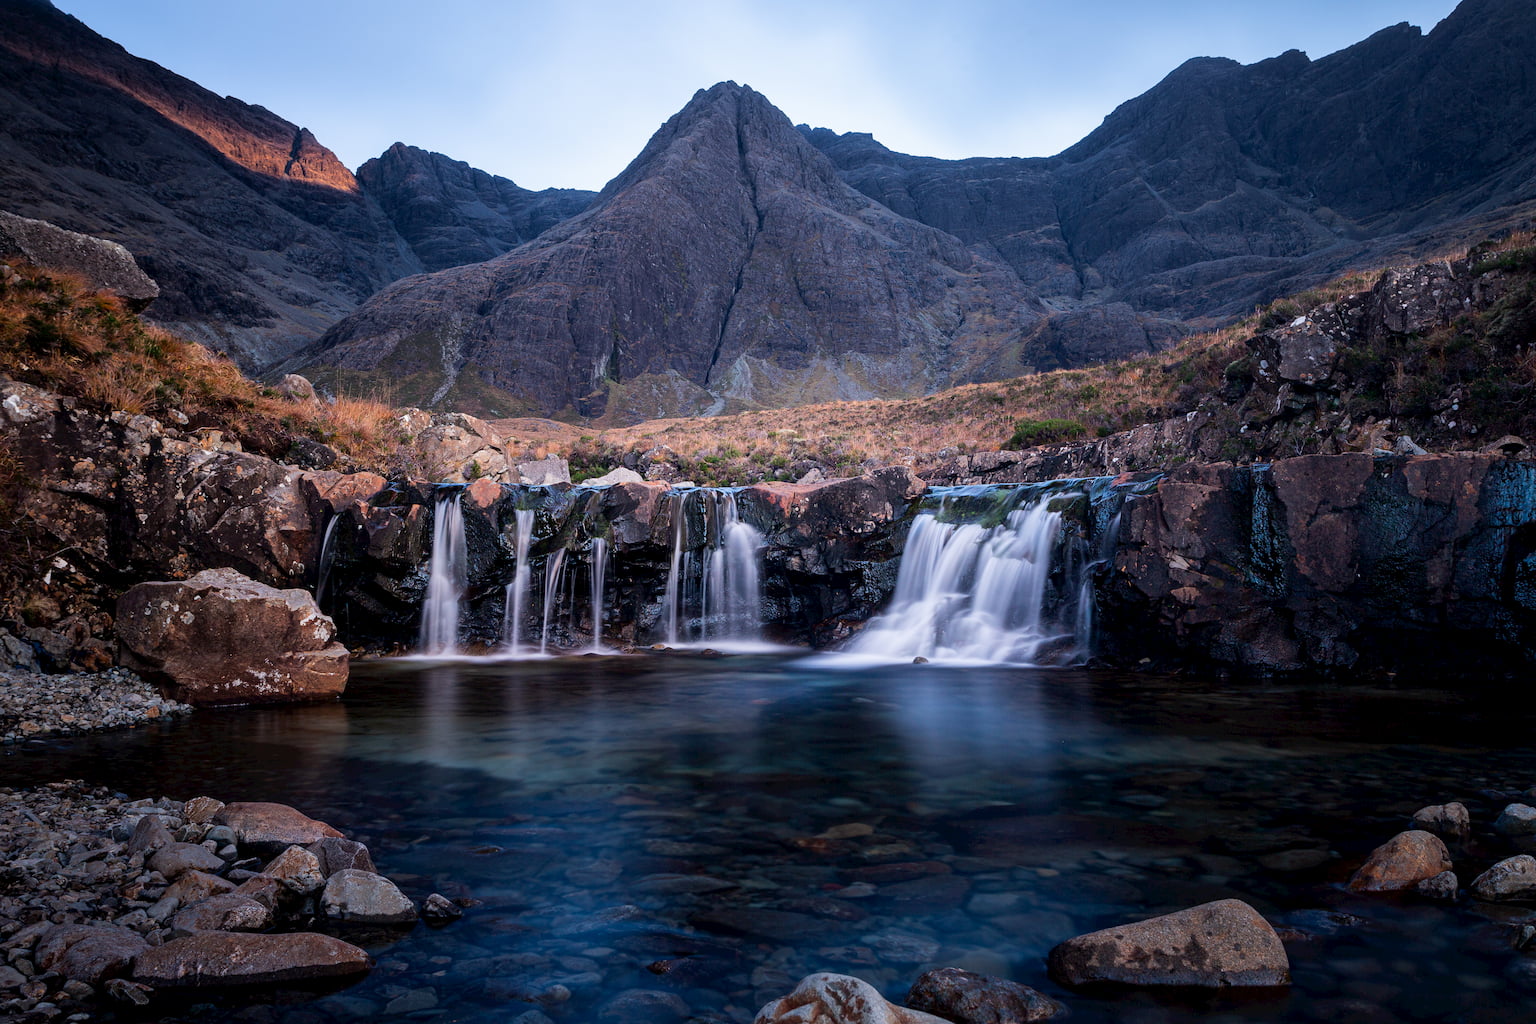 The Fairy Pool Waterfalls on the Isle of Skye surrounded by the Black Cuillin Mountains.